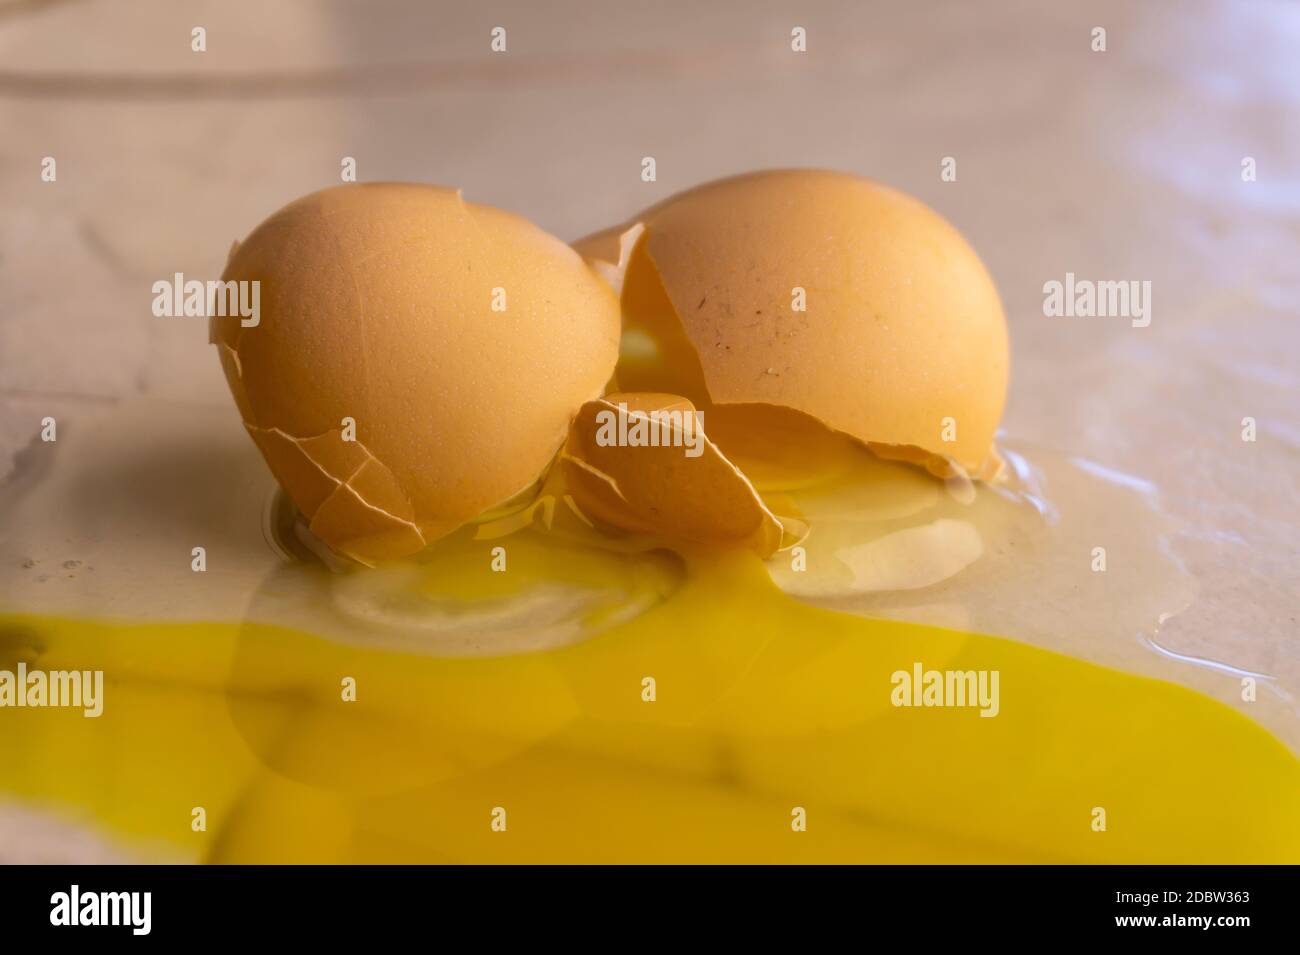 Split yellow yoke and white of a broken egg with the smashed shell on a kitchen counter in close up Stock Photo